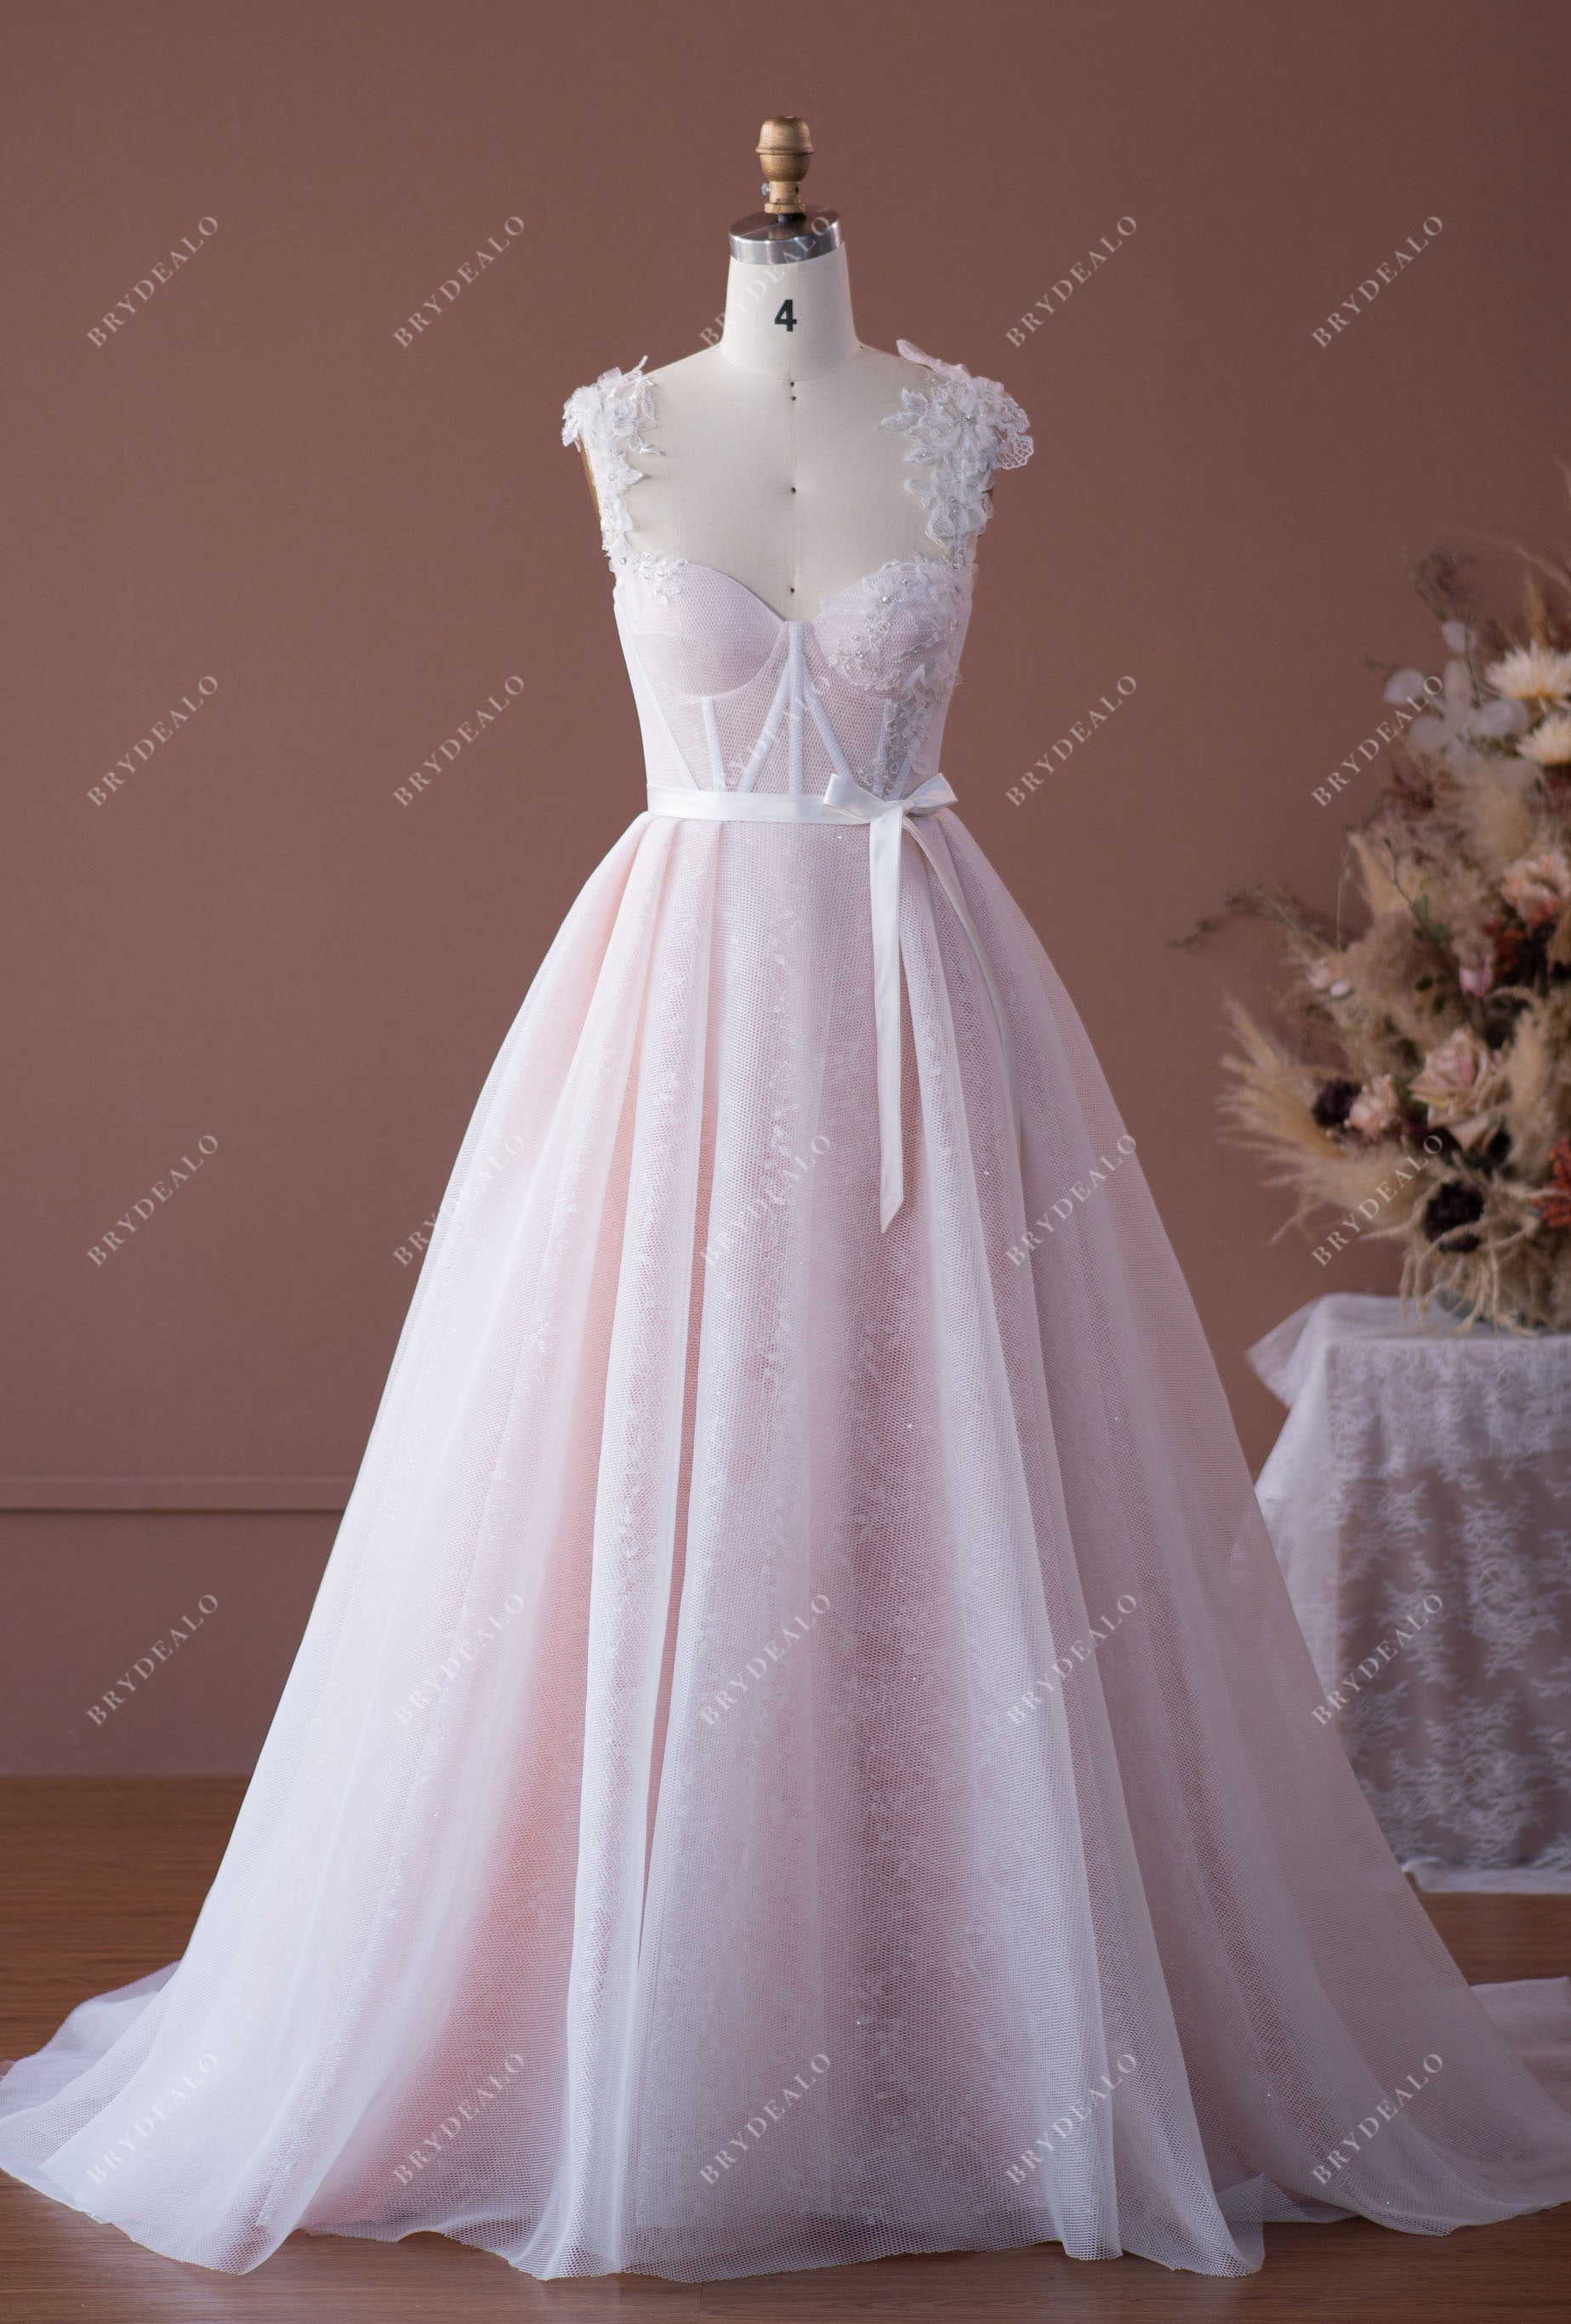 Sweetheart Neck Lace Straps Pinkish Corset A-line Sample Bridal Gown